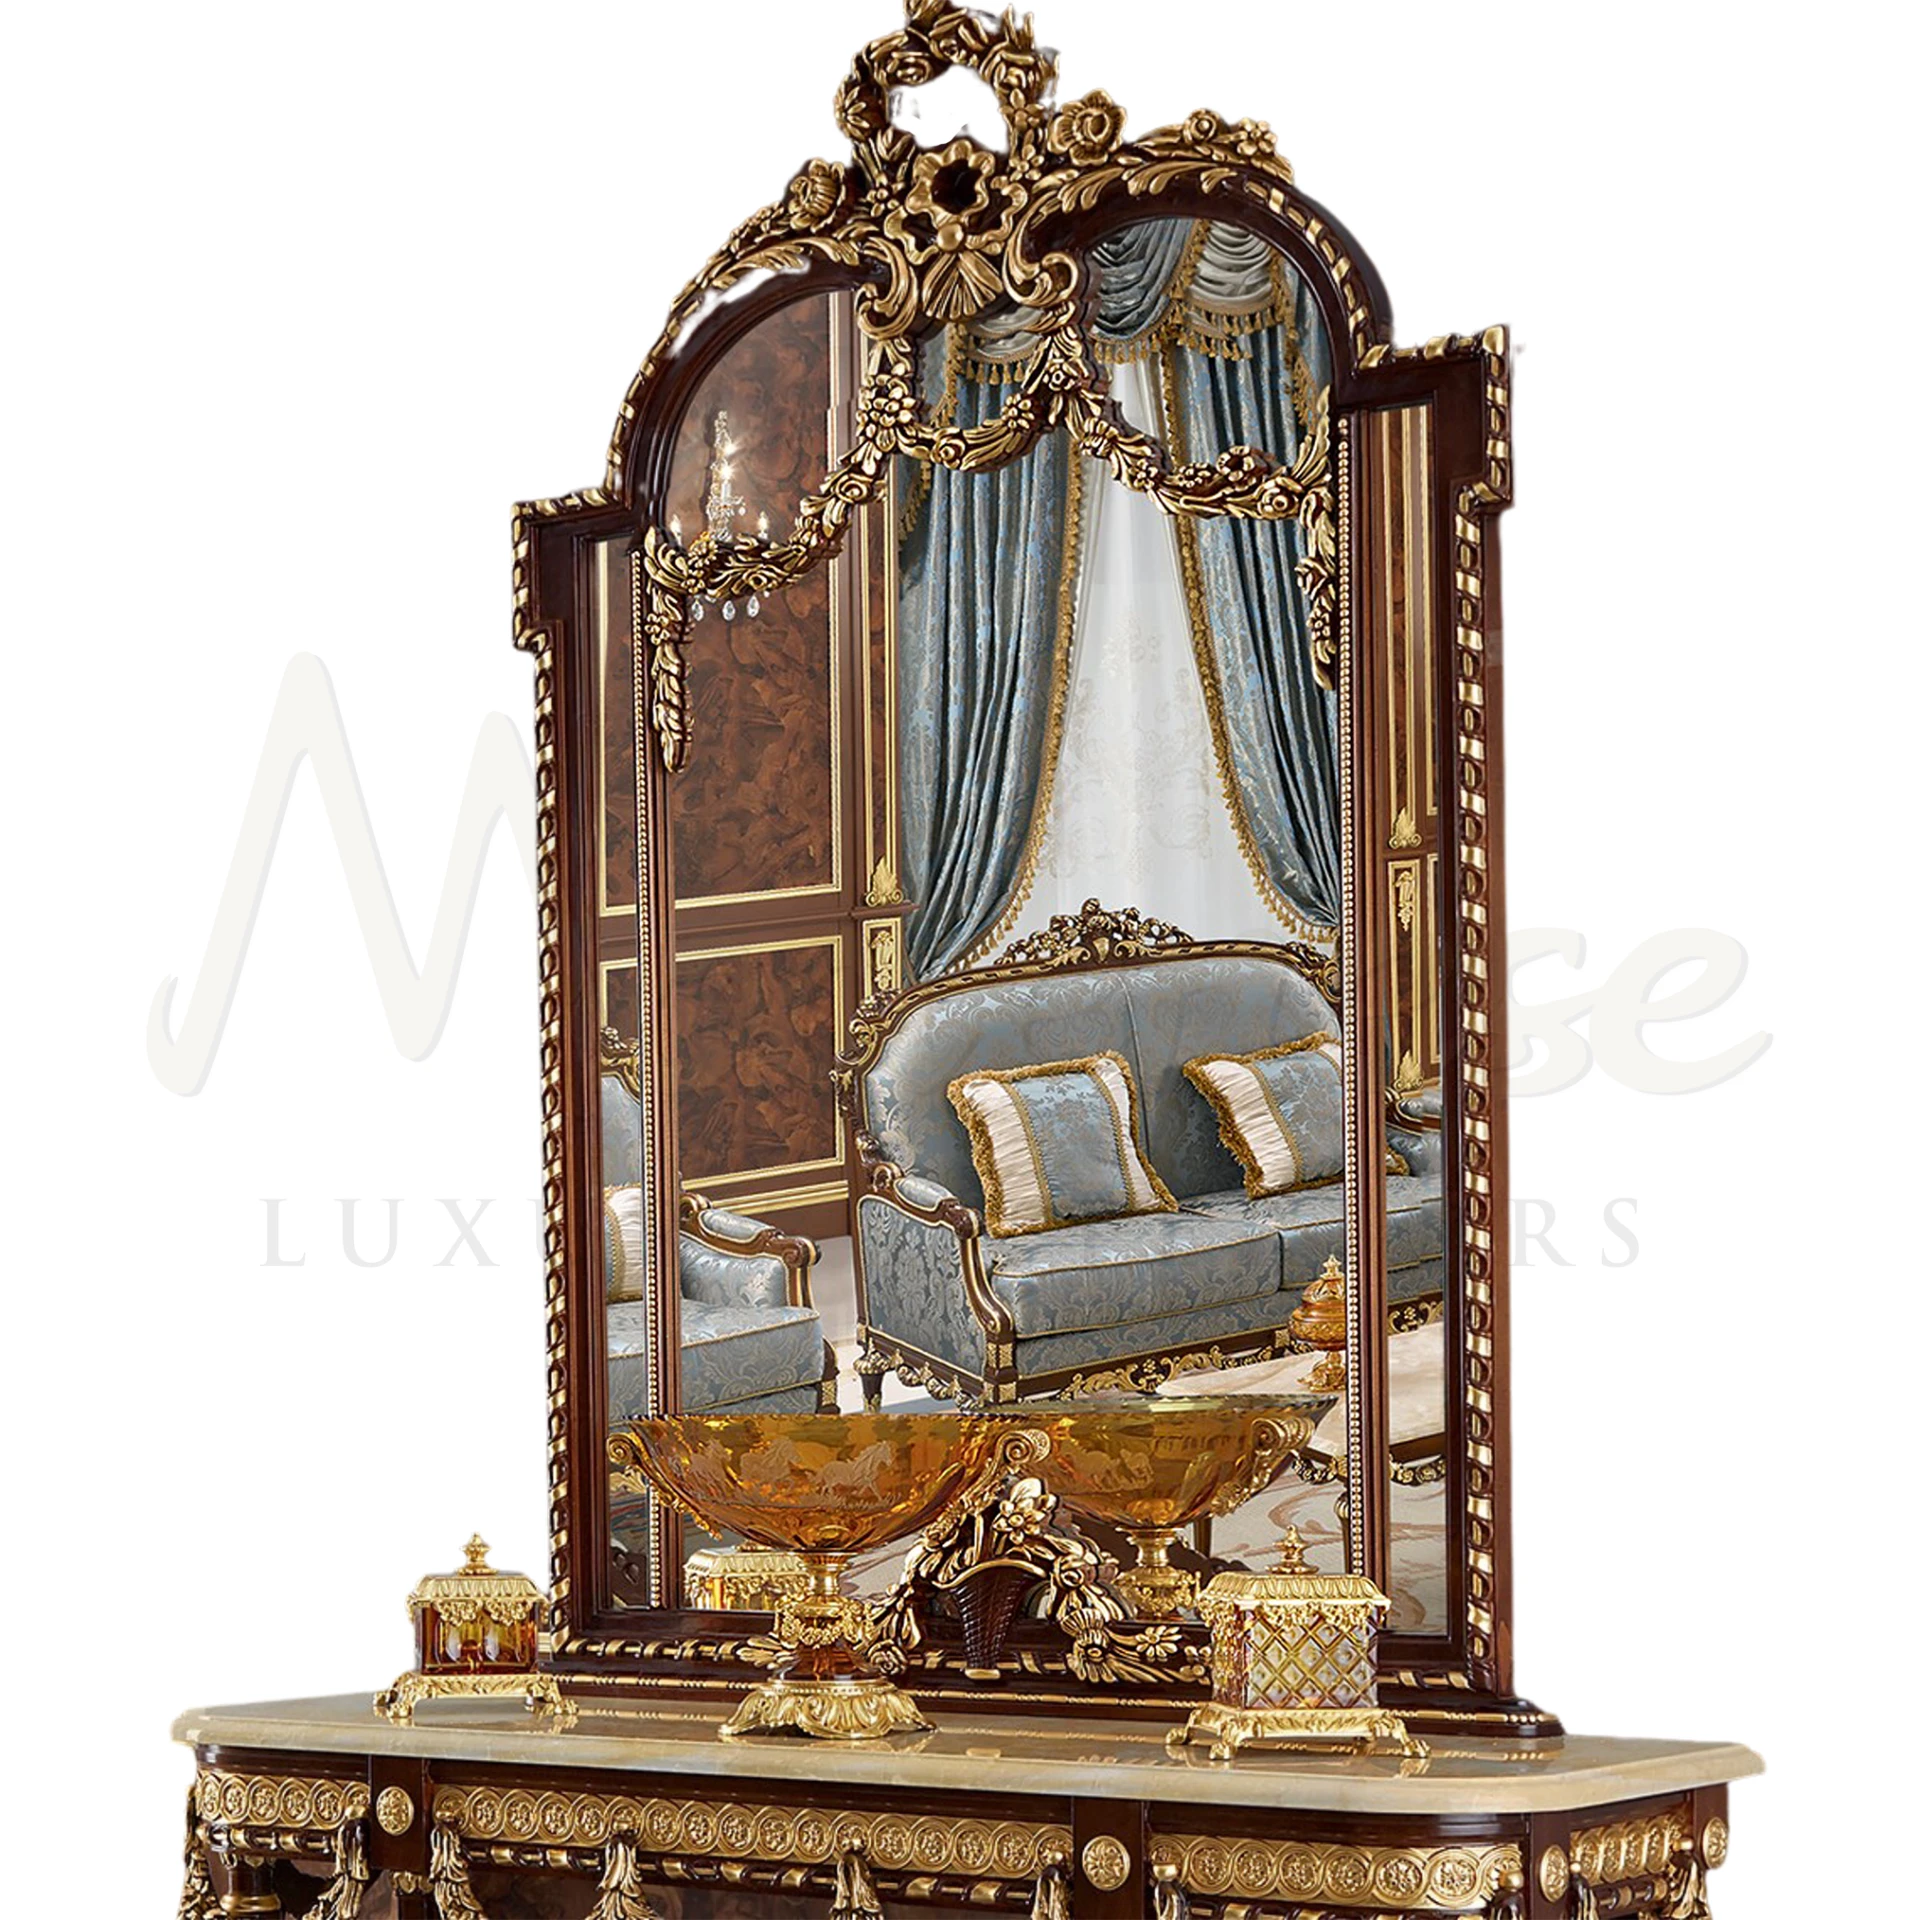 Modenese Classic Style Luxury Mirror with gold leaf accents, bringing Italian elegance to luxury interior design.